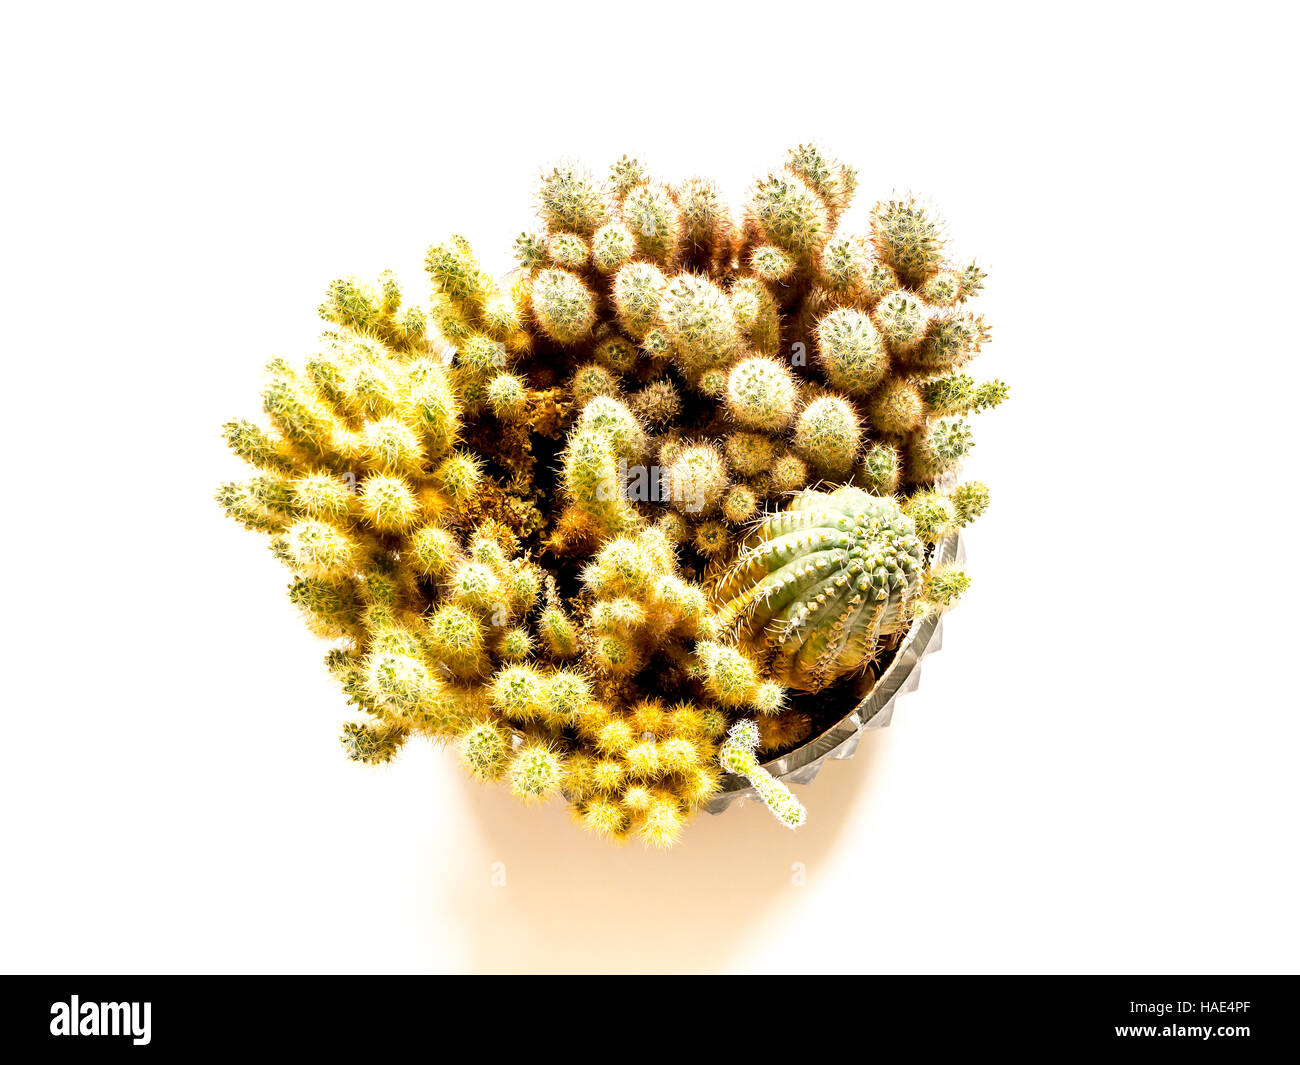 The nature green isolated Cactus. Stock Photo